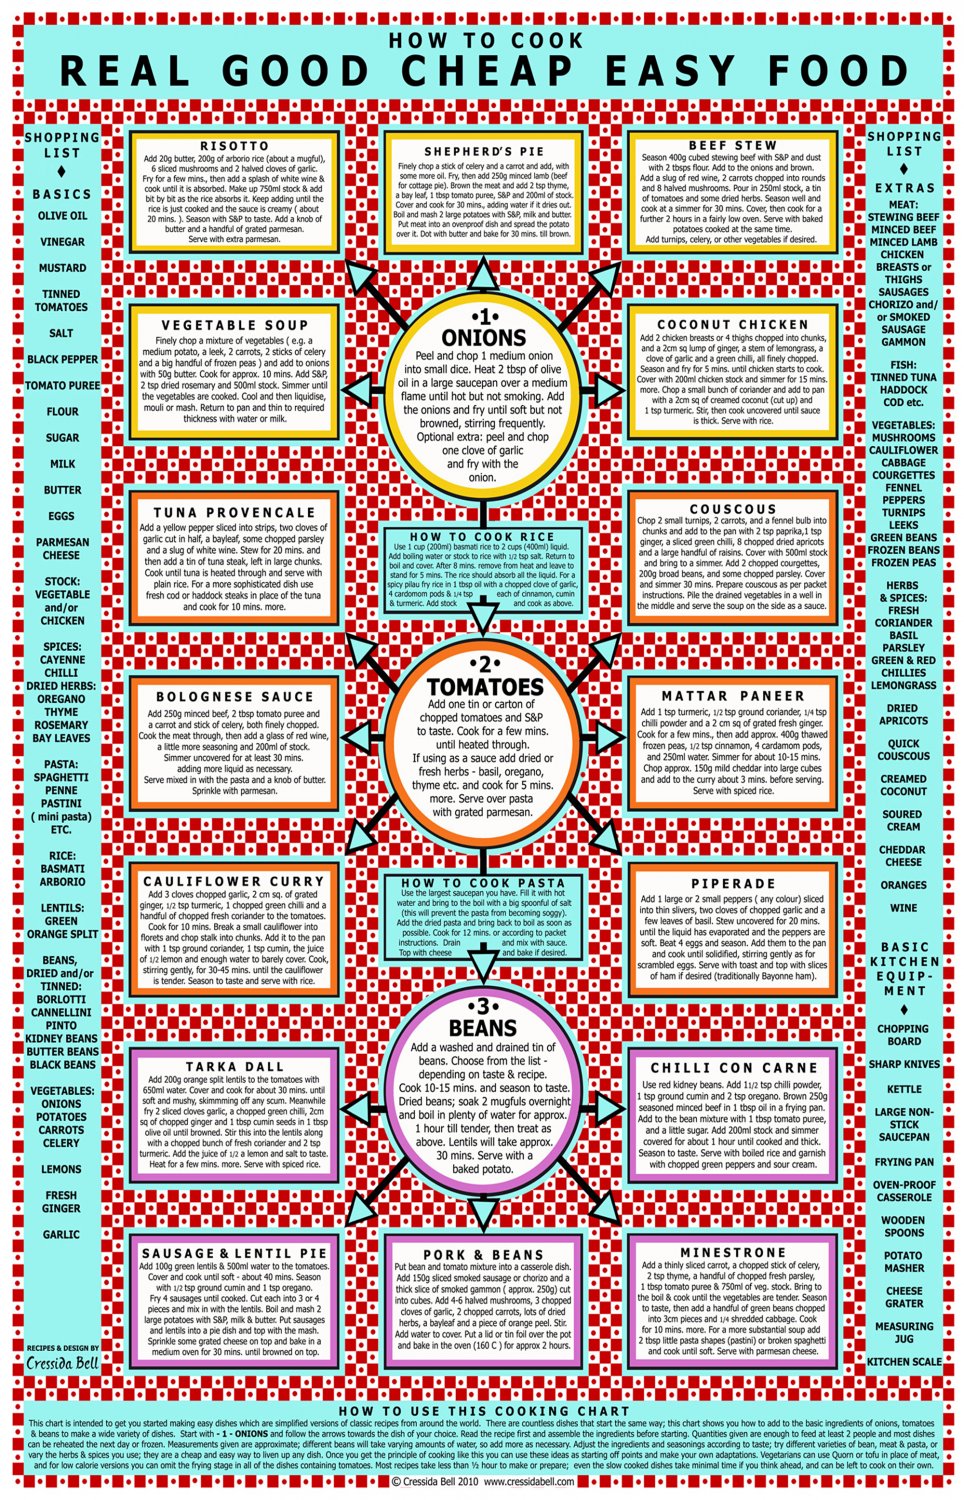 How to Cook Real Good Cheap Food Chart 13"x19" (32cm/49cm) Canvas Print